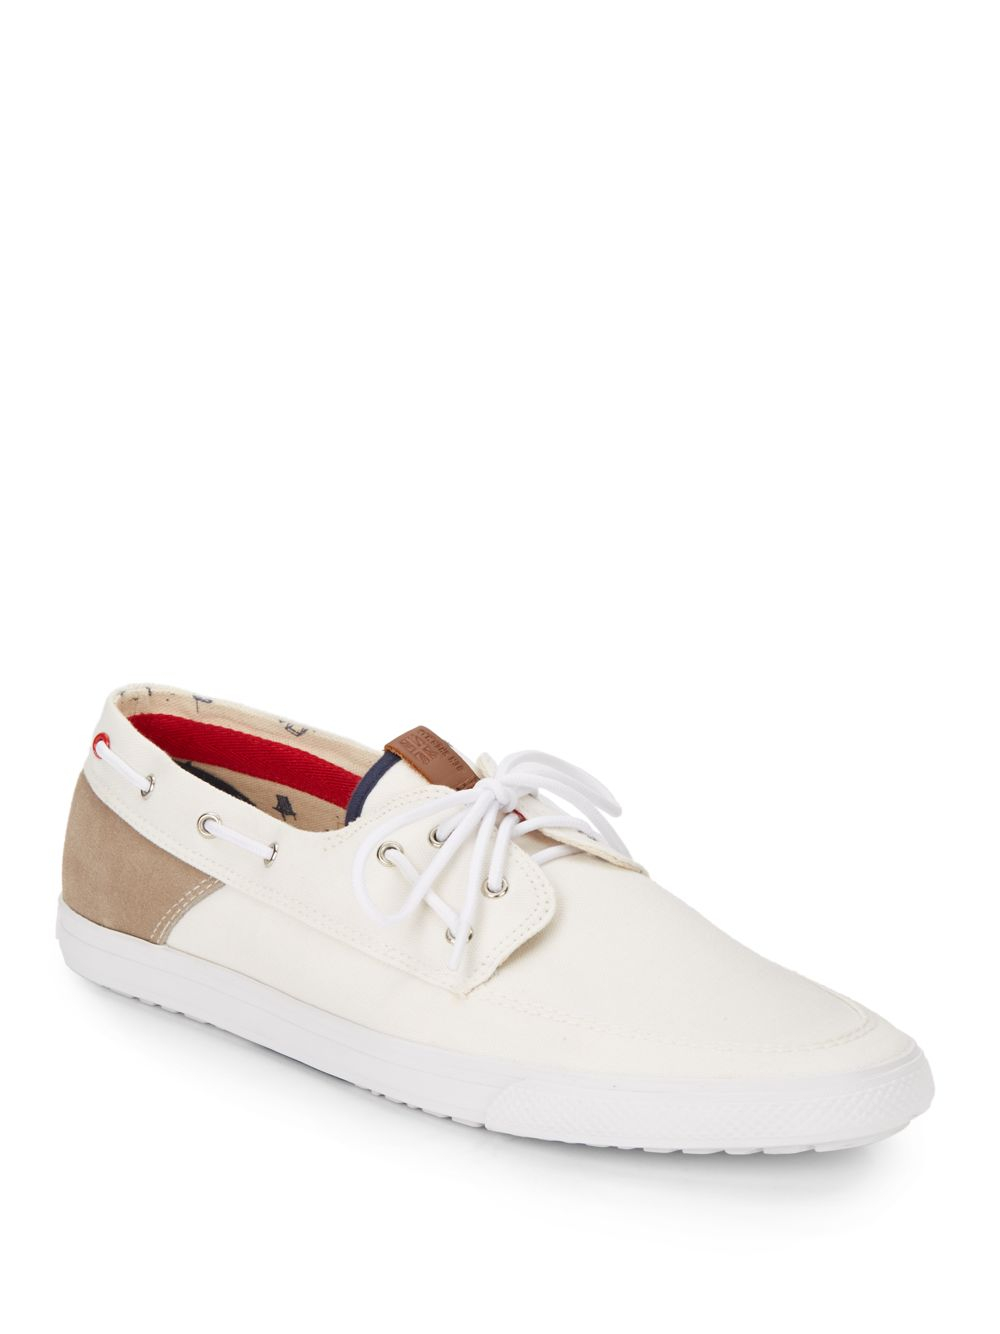 Lyst - Ben Sherman Smith Canvas Boat Shoes in White for Men